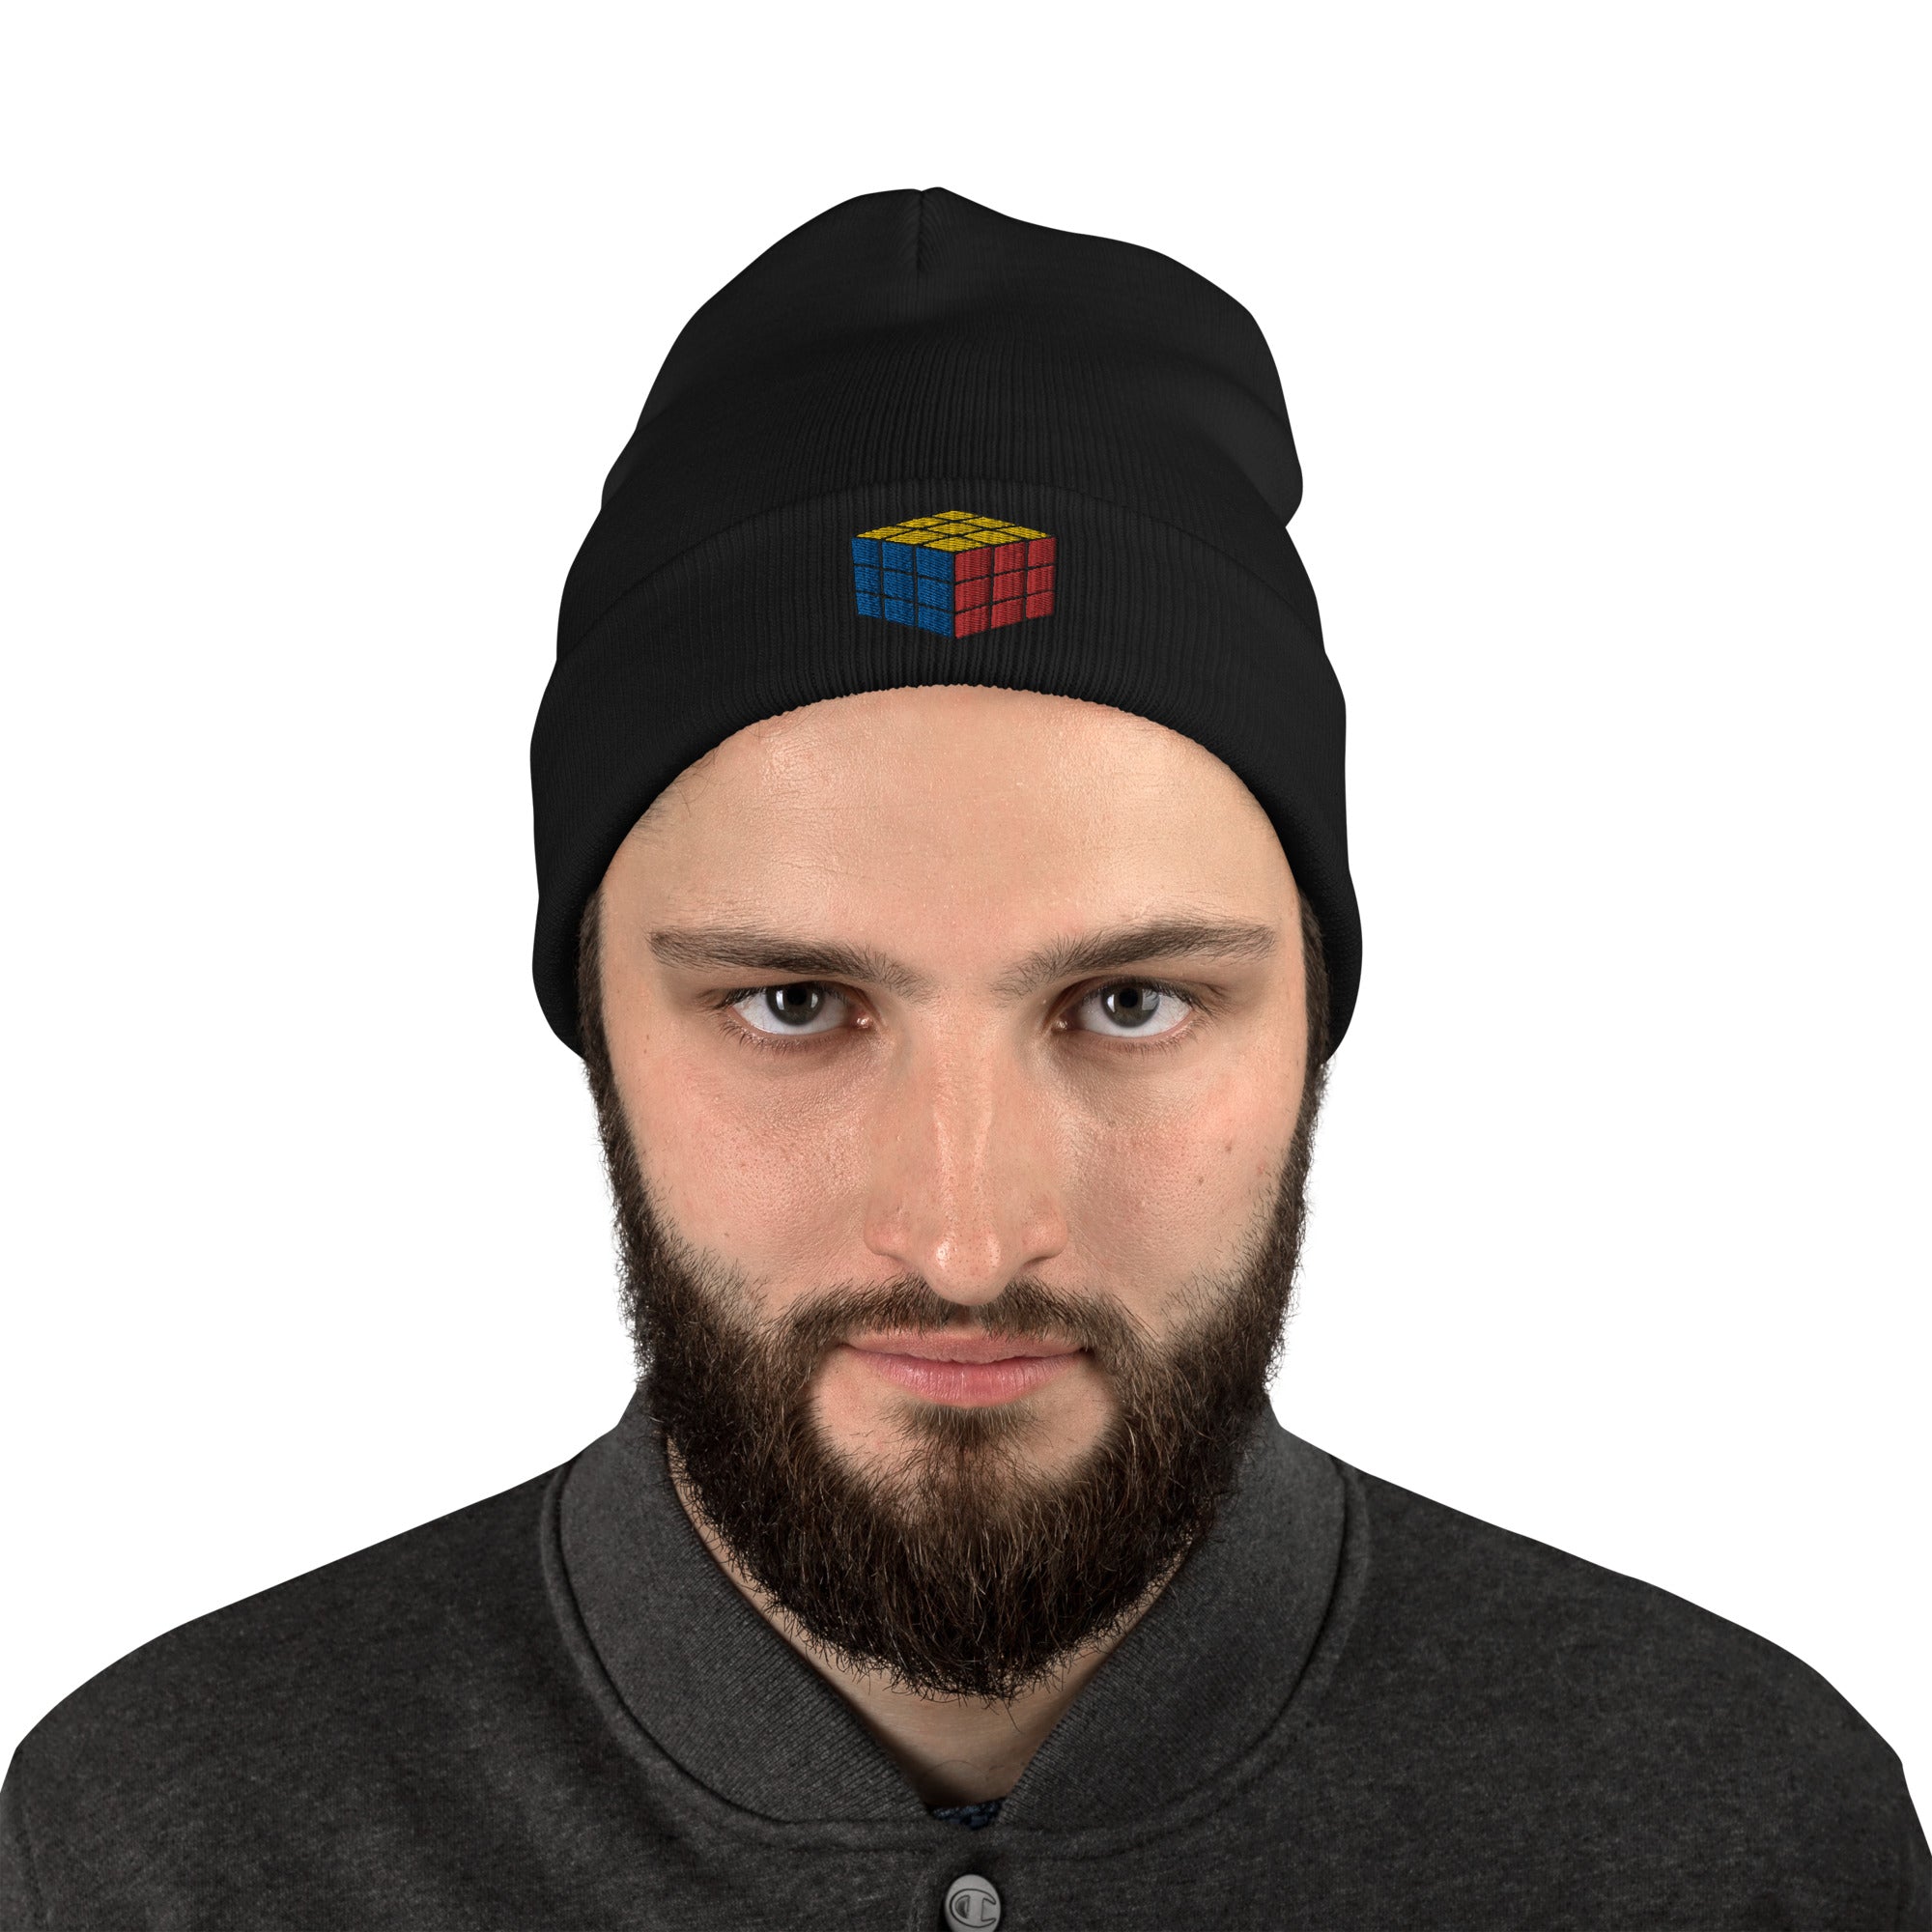 Gaming Speed Cube Puzzle Box Embroidered Cuff Beanie Rubik's Cube - Edge of Life Designs